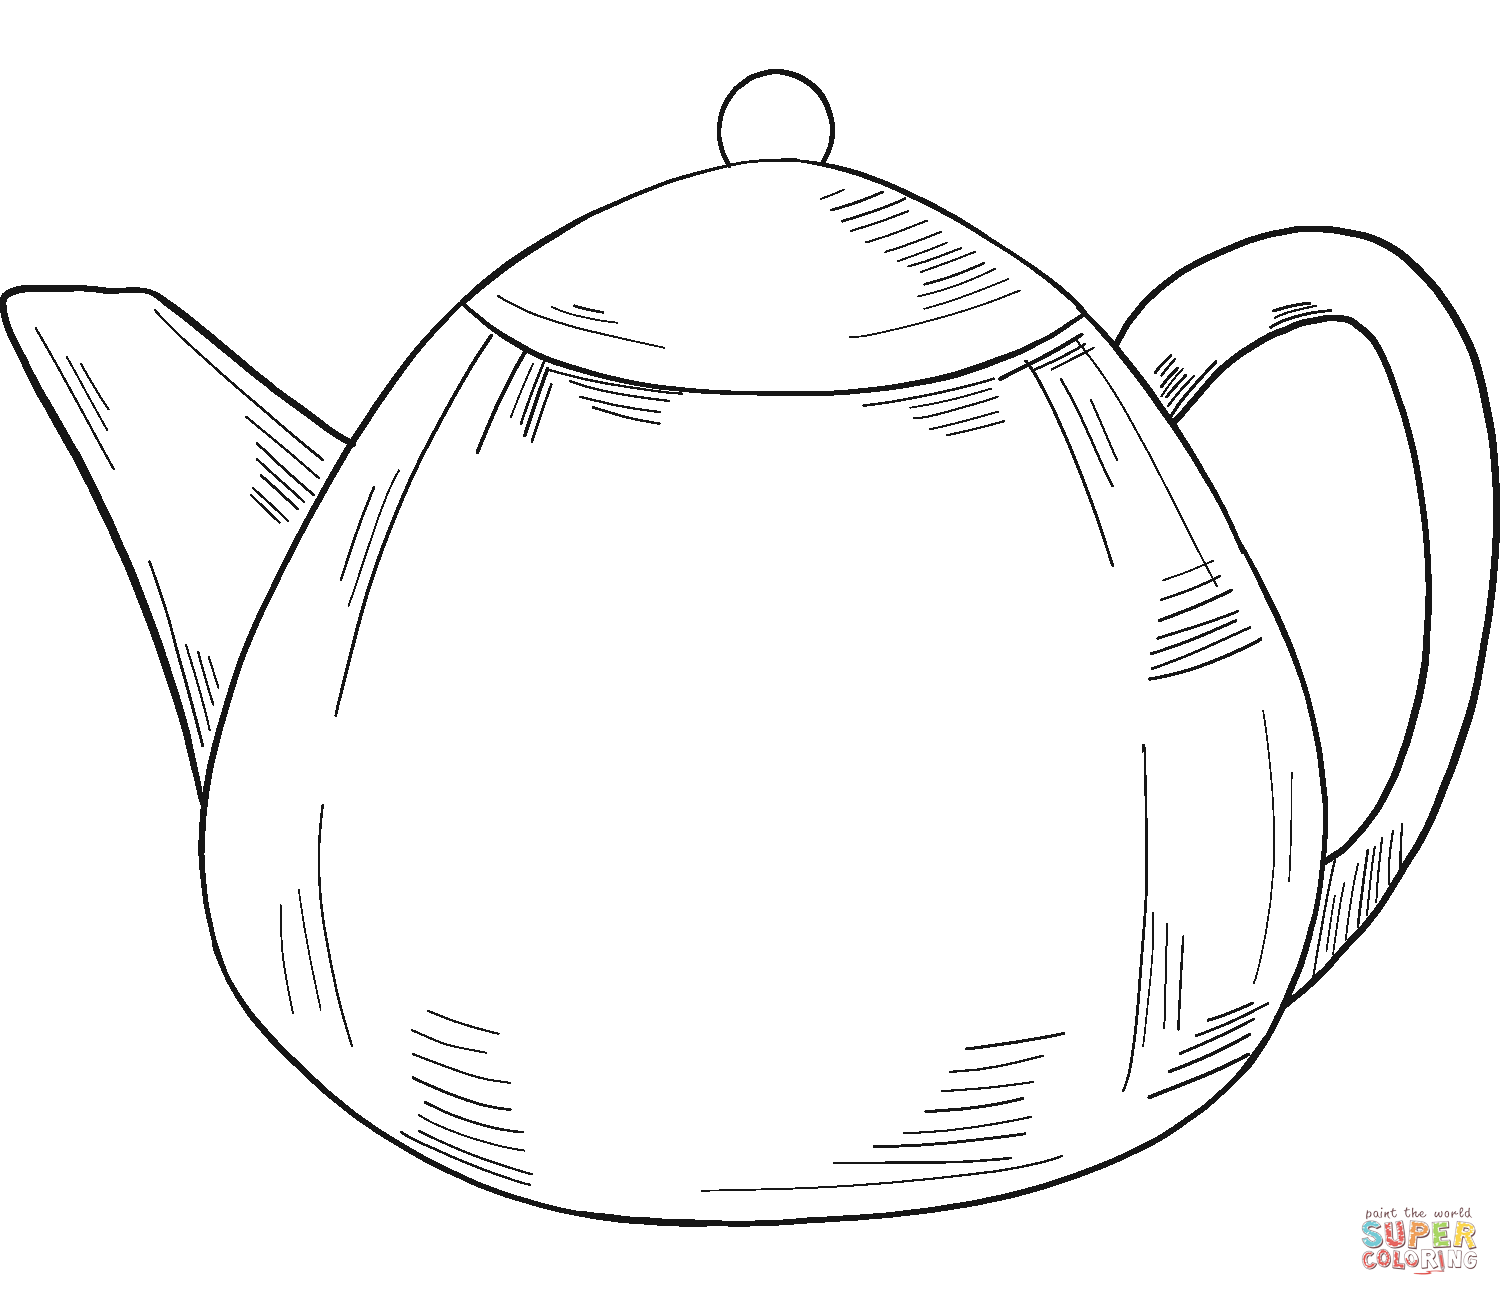 Teapot coloring page free printable coloring pages